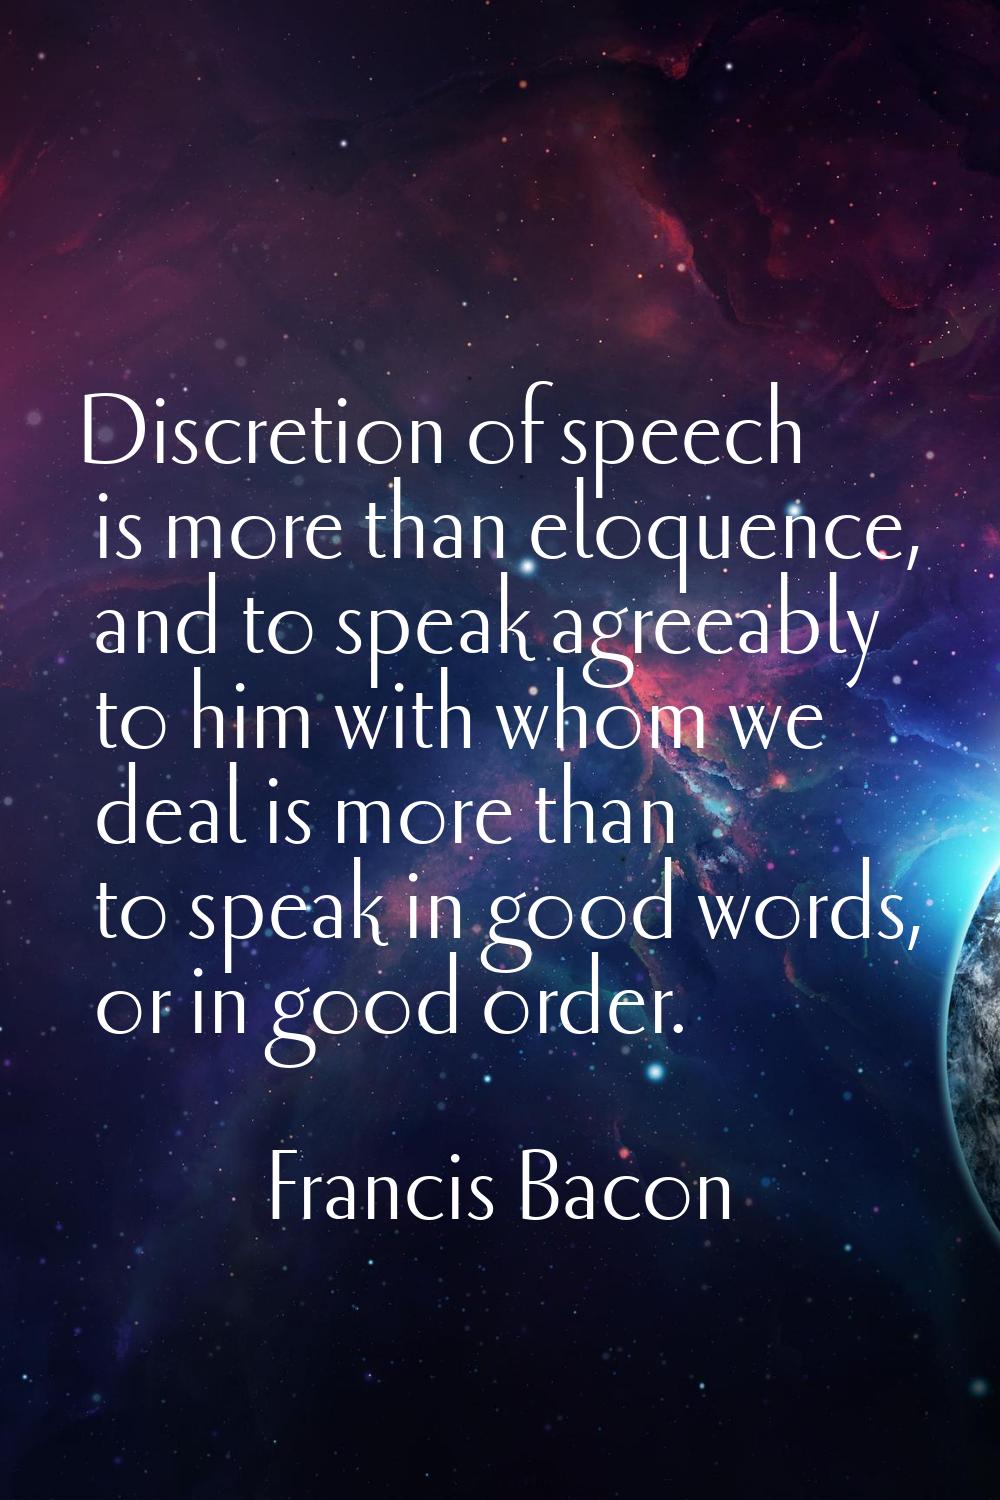 Discretion of speech is more than eloquence, and to speak agreeably to him with whom we deal is mor